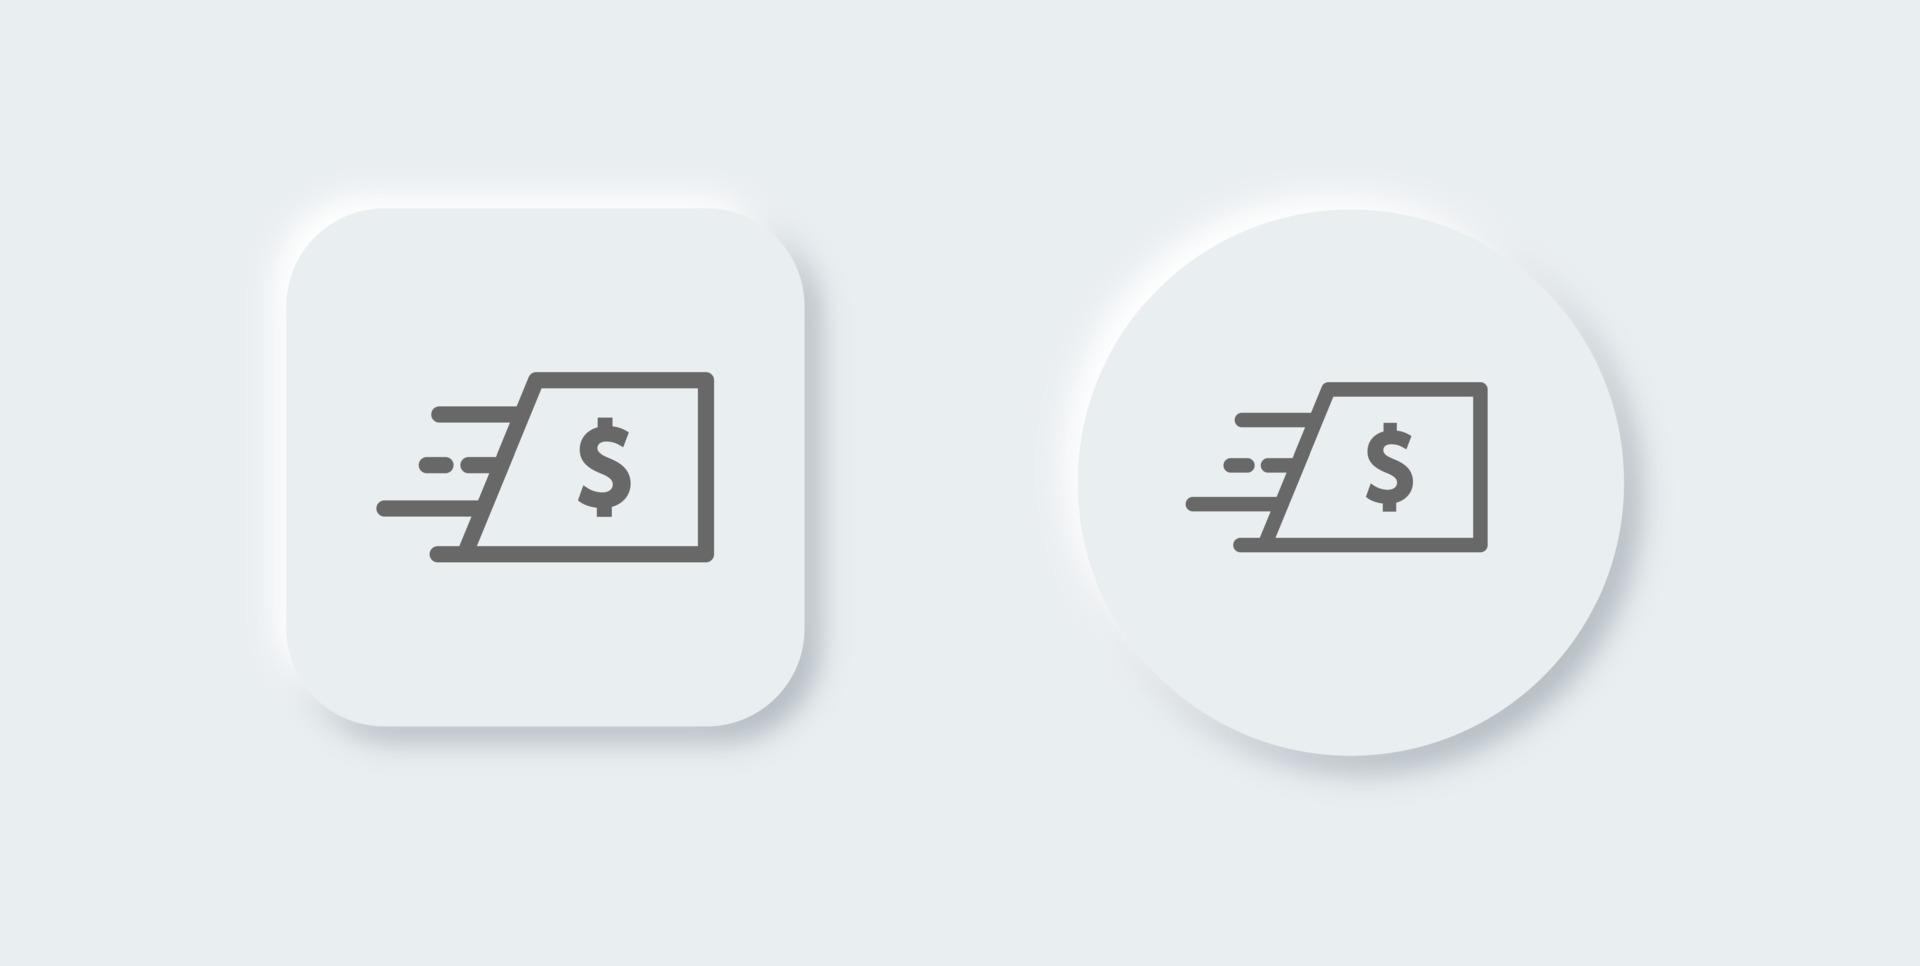 Send money line icon in neomorphic design style. Payment signs vector illustration.